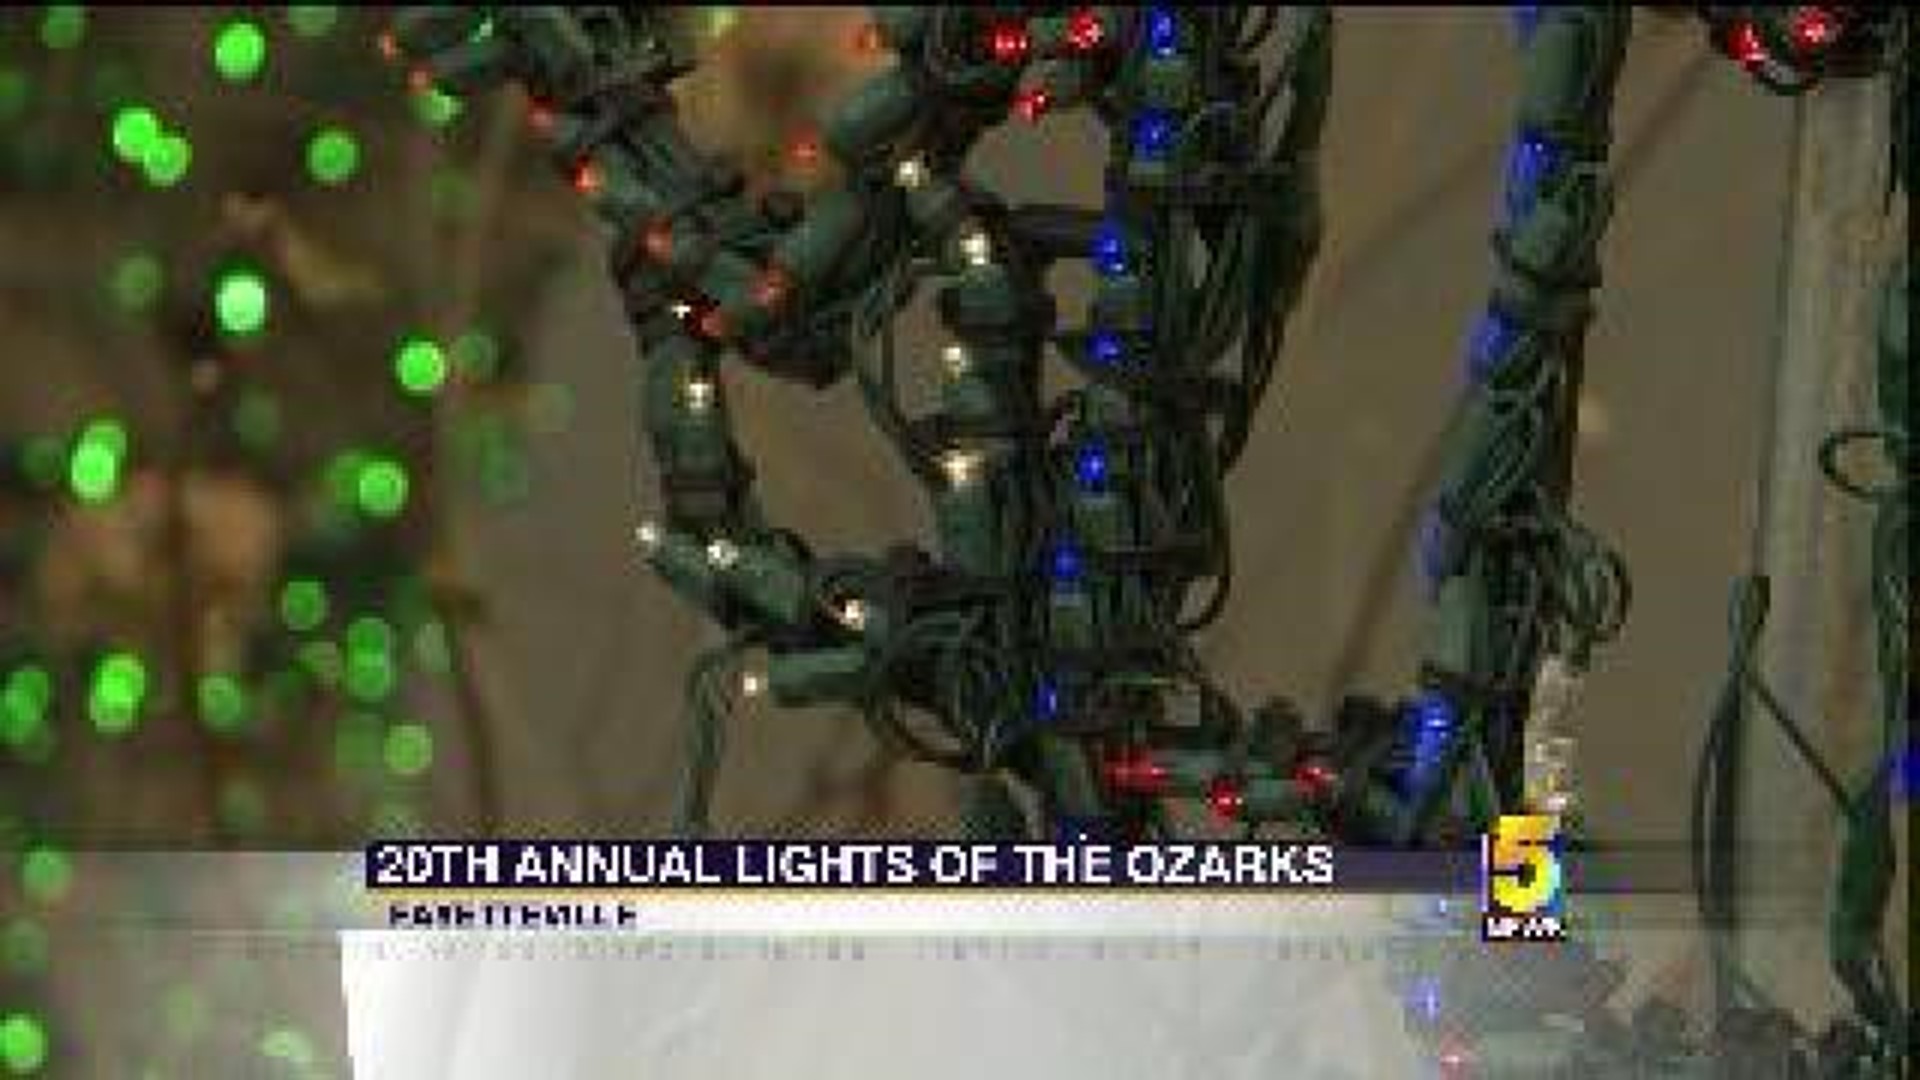 Prepping for the Lights of the Ozarks